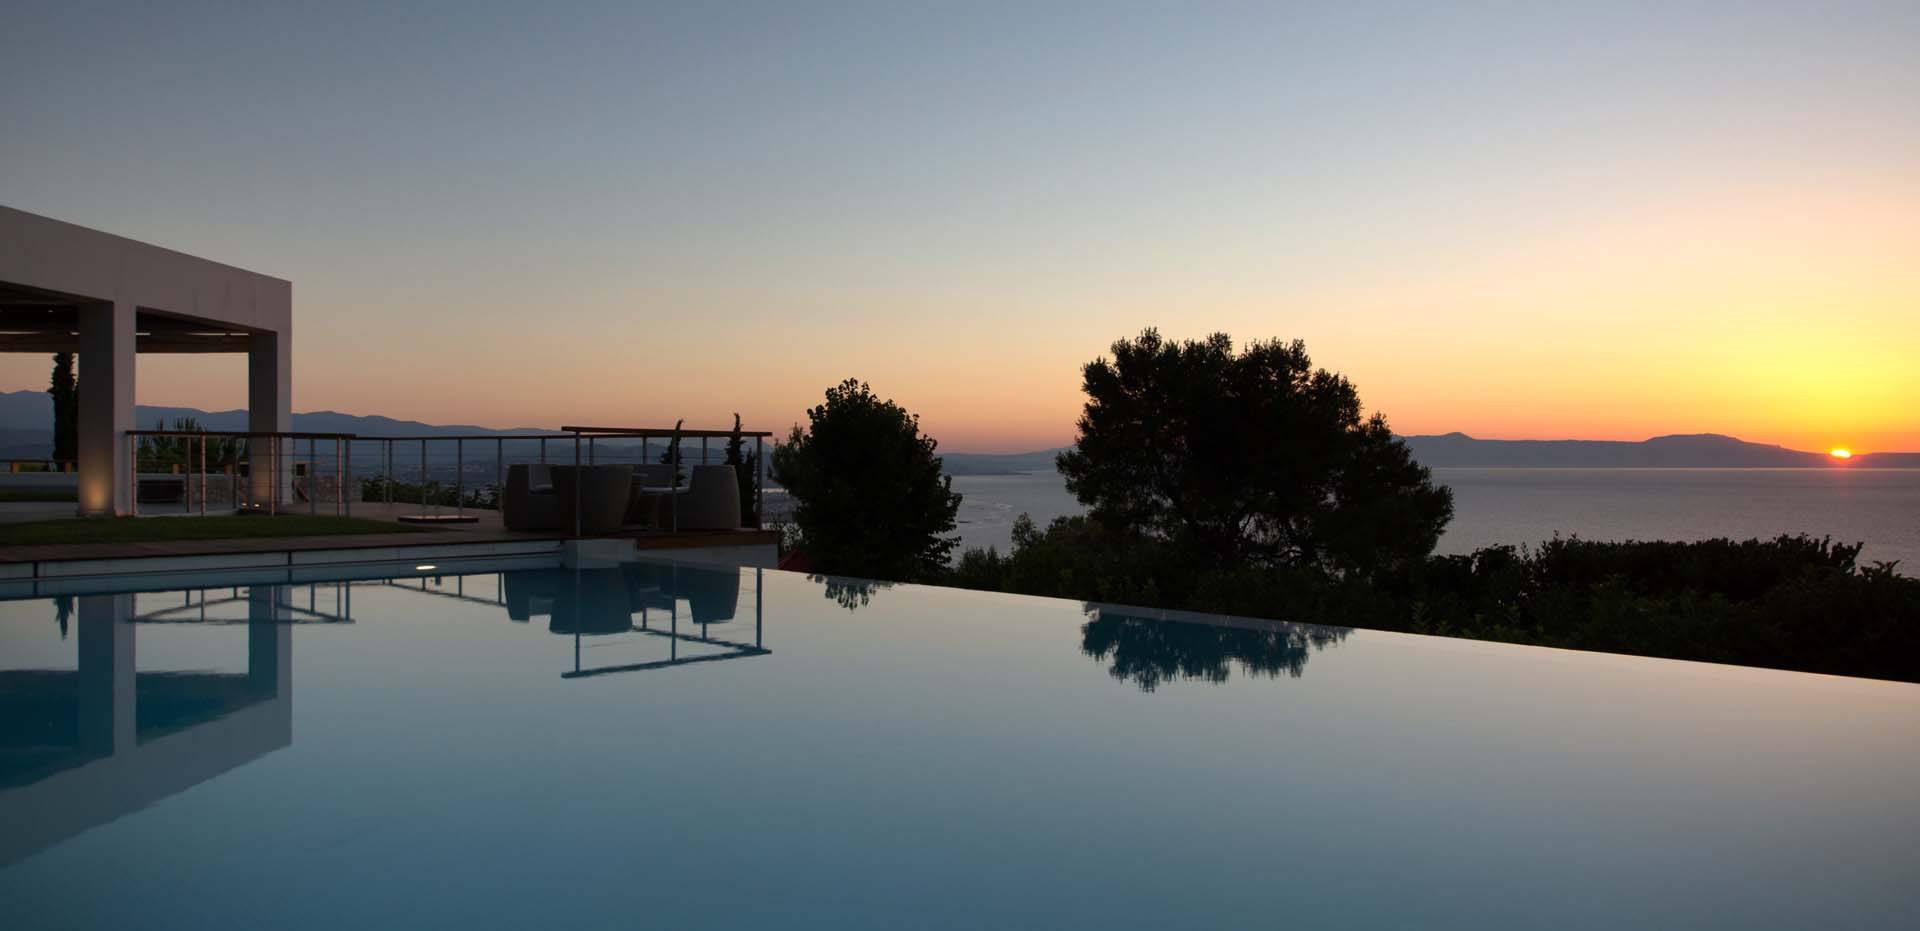 Treat yourself to a slice of heaven in this Elegant and Luxurious 3 level Villa in the Island of Crete!